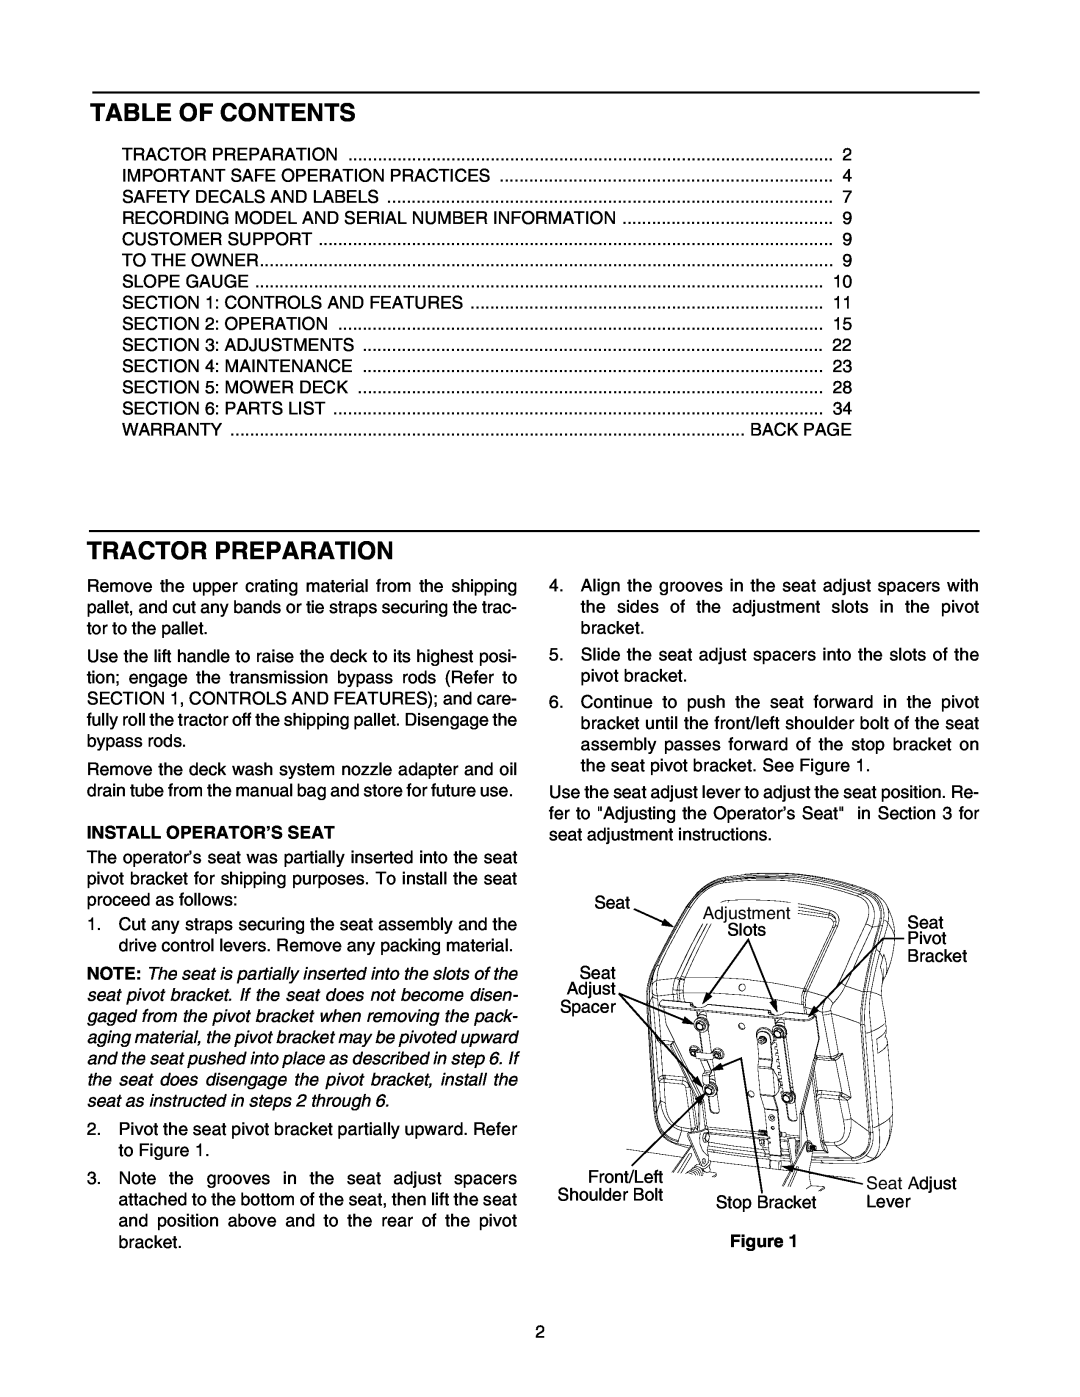 MTD ZT 50, ZT 42 manual Table Of Contents, Tractor Preparation, Install Operator’S Seat 